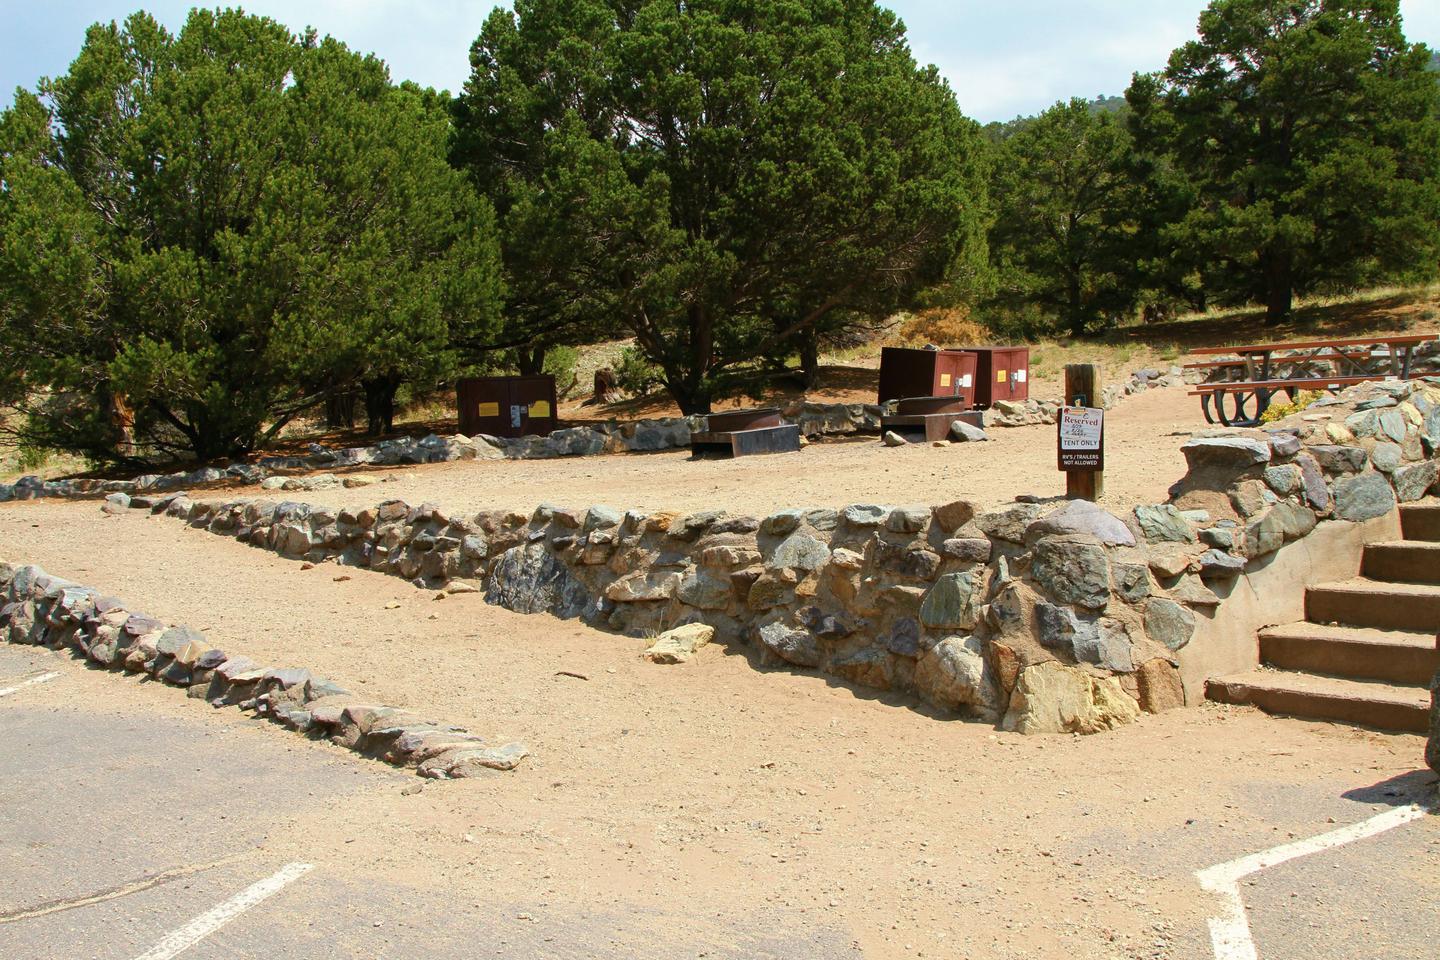 Close up view of Group Site "C" accessible gravel ramp. Bear boxes, fire rings, and picnic tables can be seen in the background.Group Site C, Pinon Flats Campground